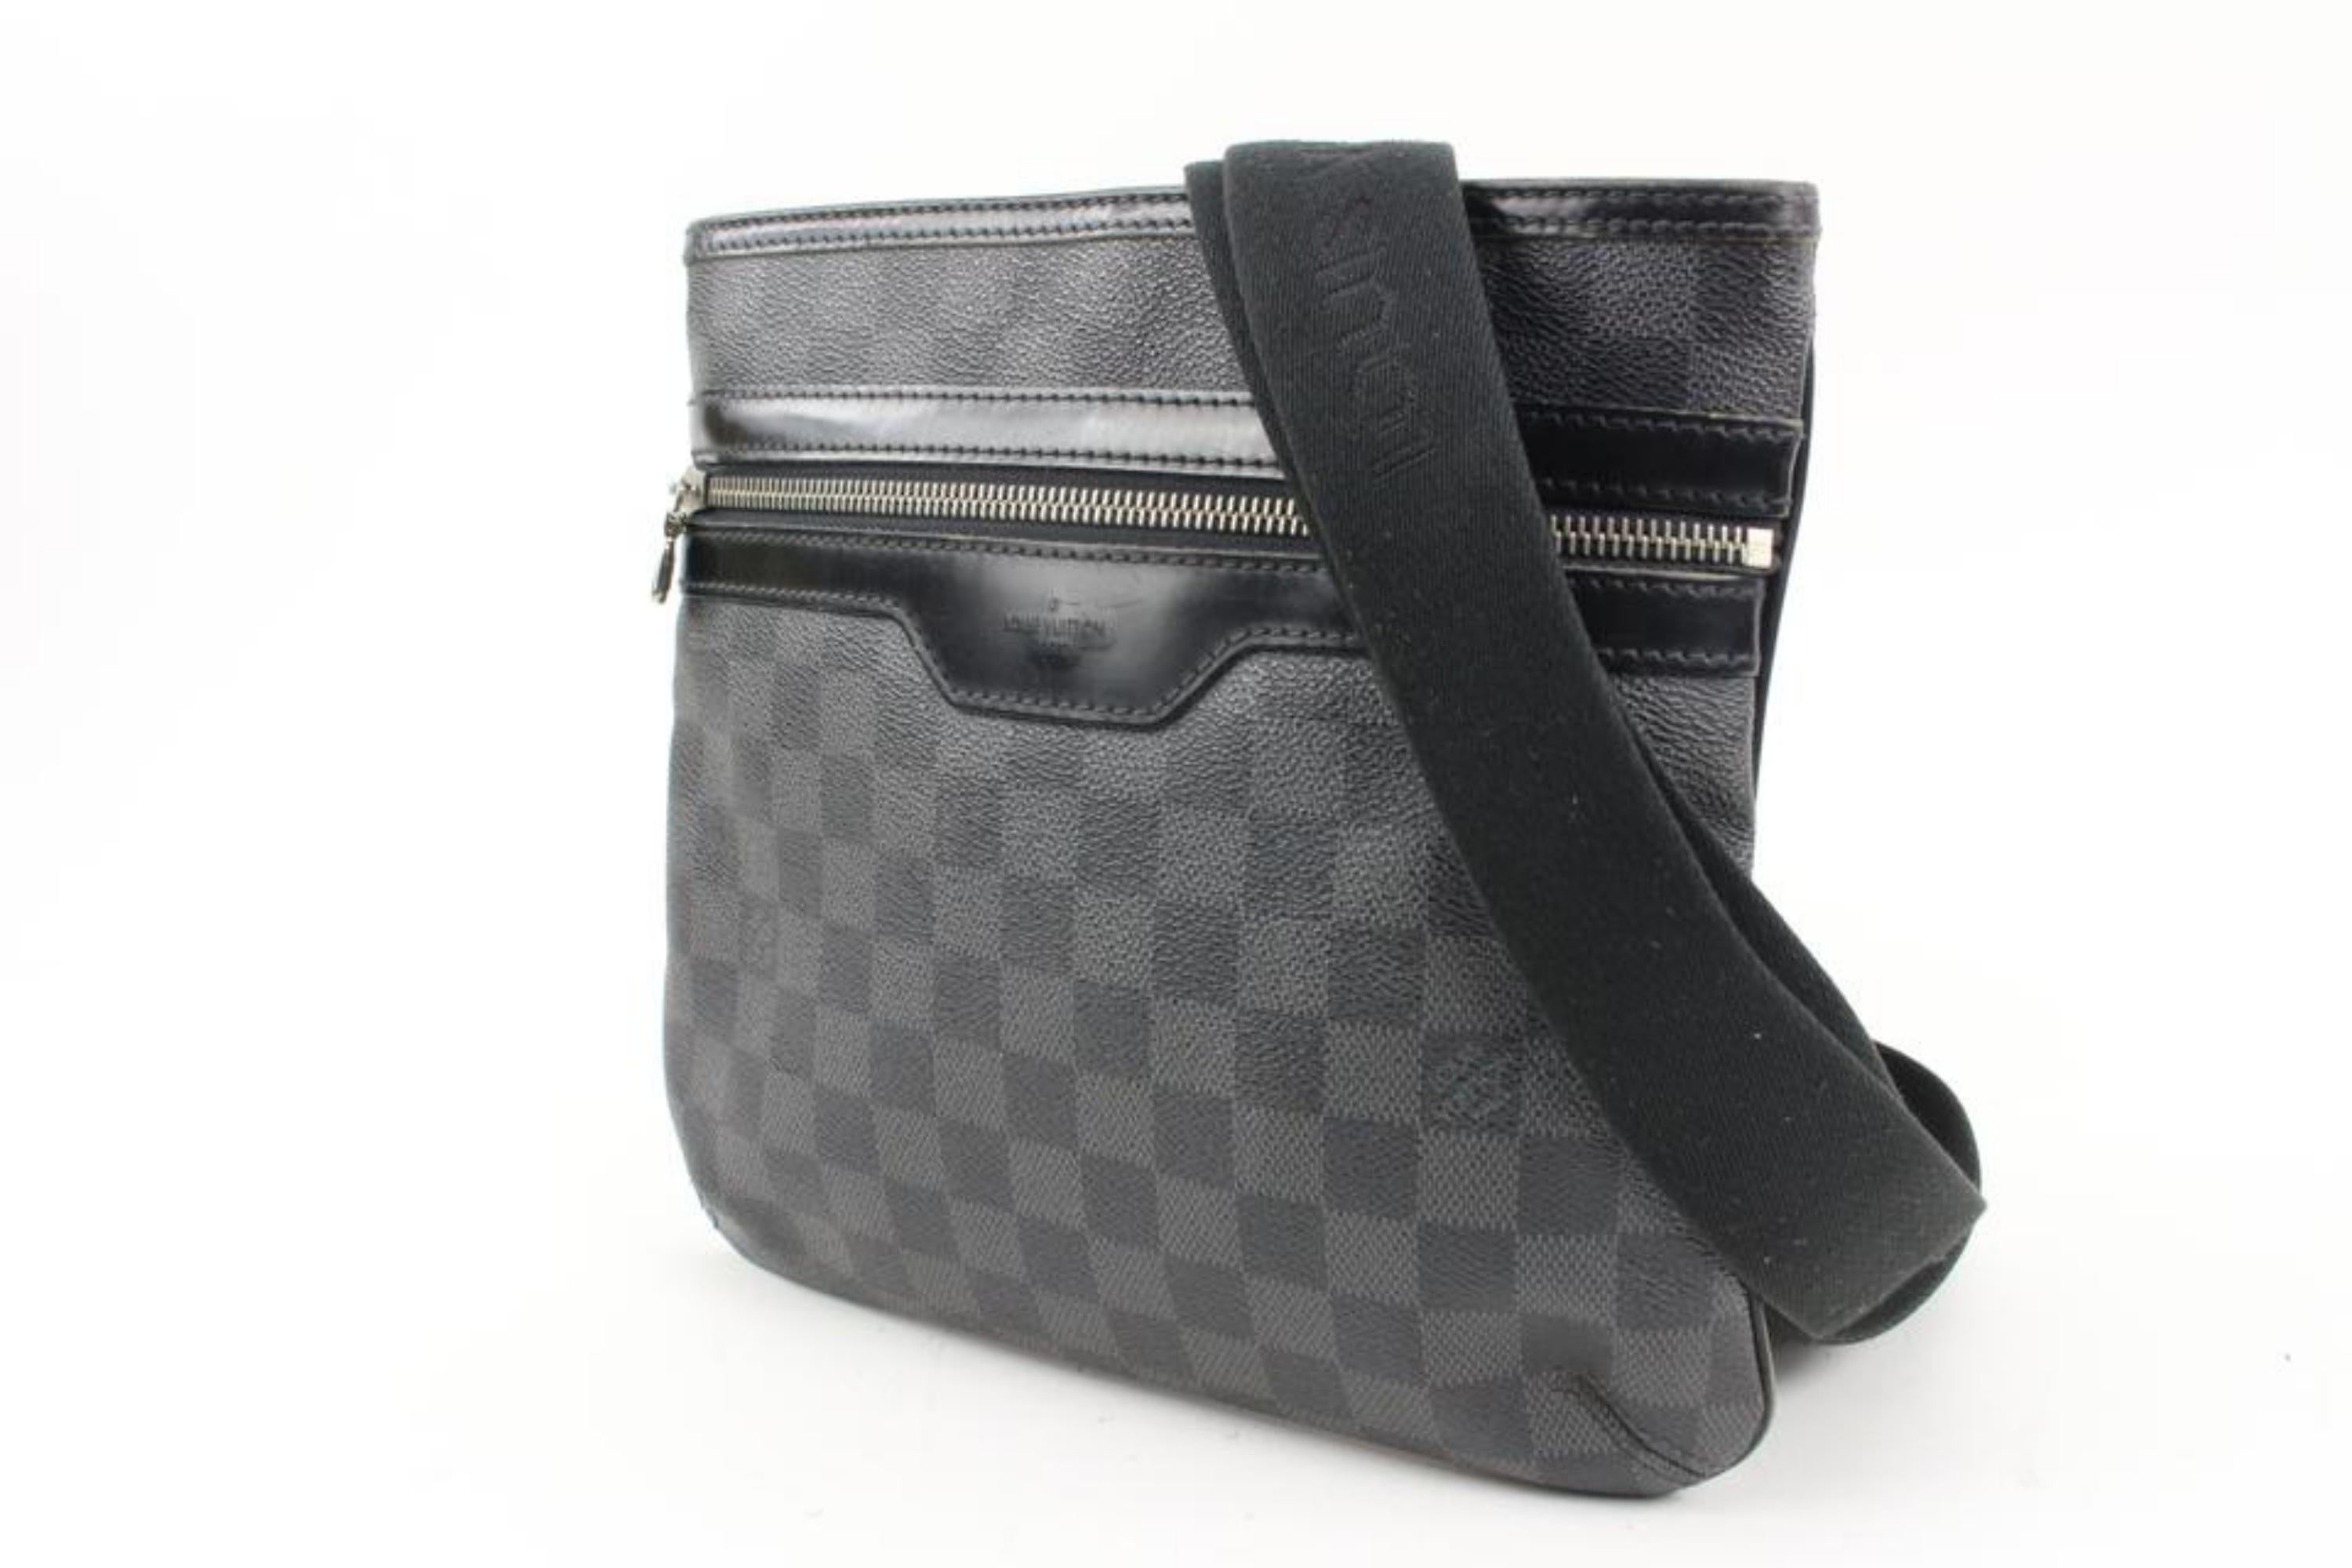 Louis Vuitton Damier Graphite Thomas Crossbody Bag s214lv75
Date Code/Serial Number: VI0131
Made In: France
Measurements: Length:  10